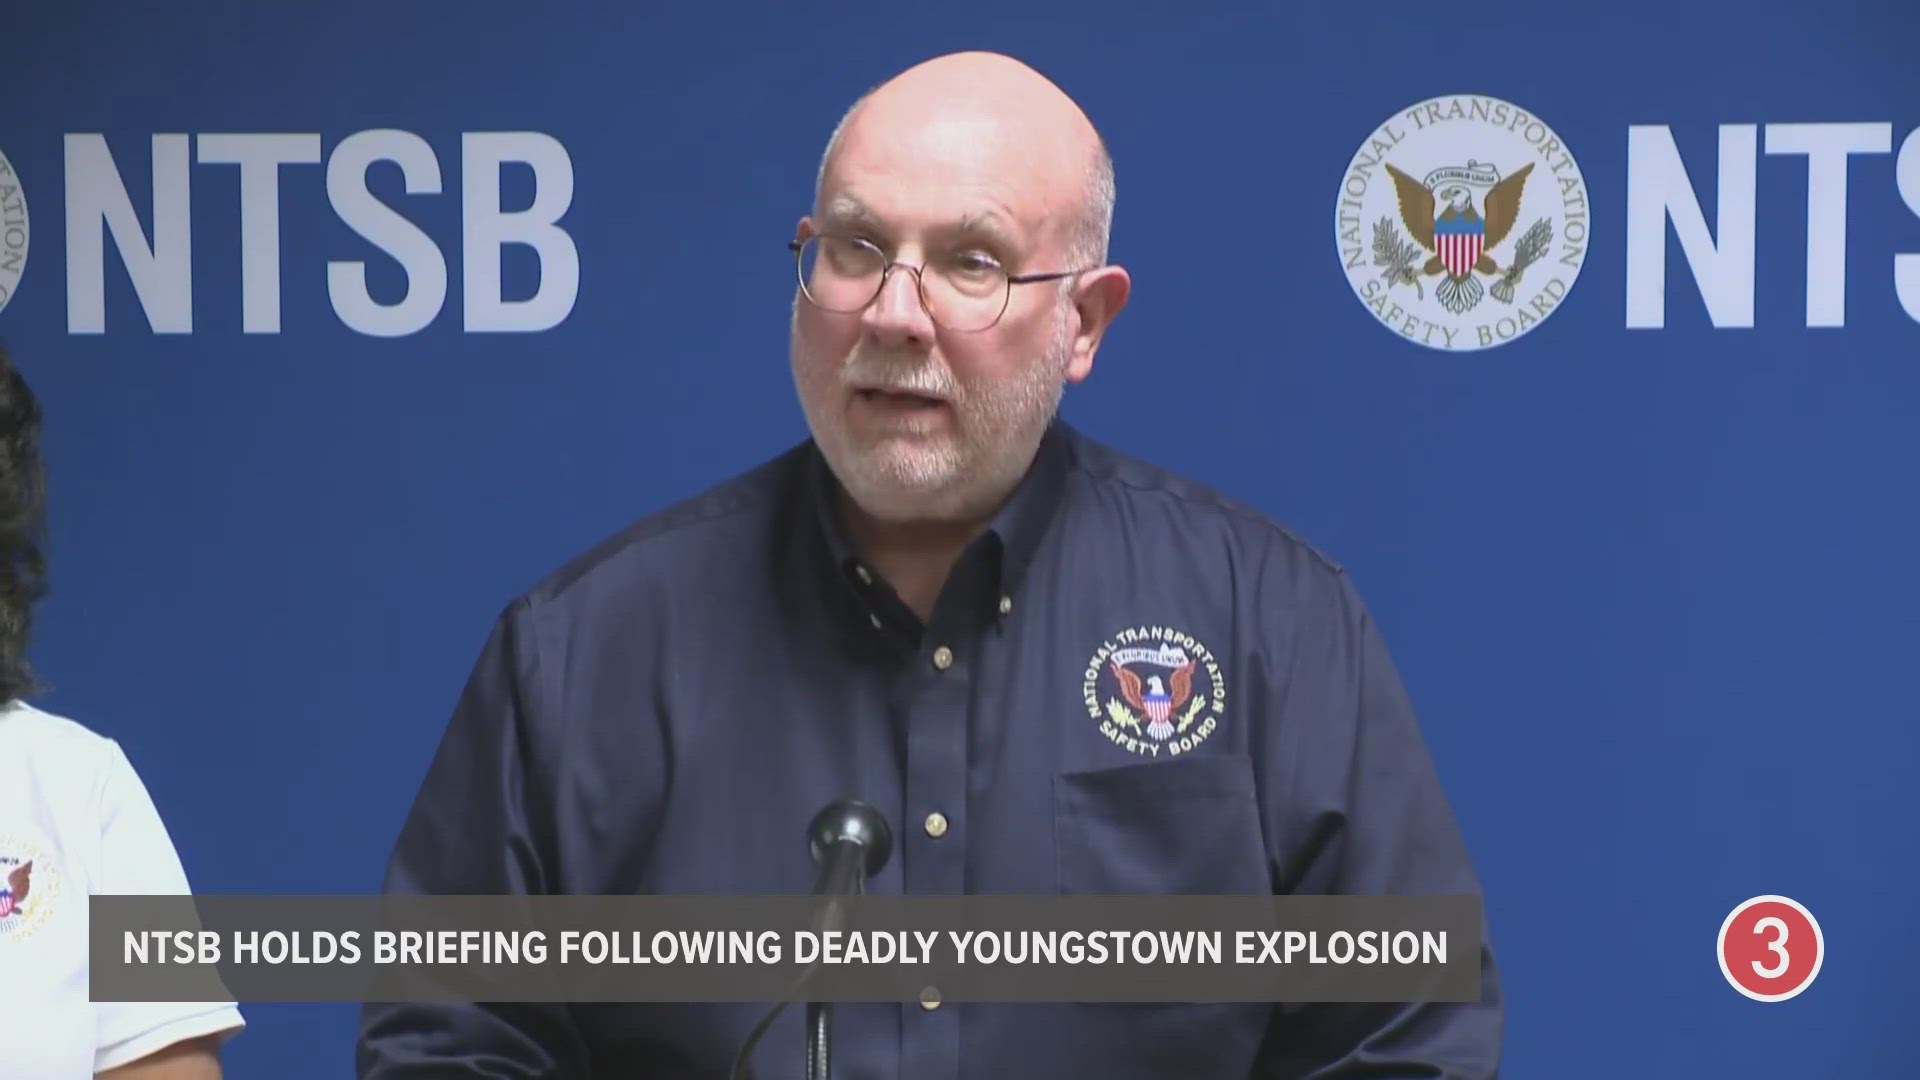 The NTSB says workers were removing old piping and infrastructure ahead of a planned city project to replace sidewalks adjacent to Realty Tower in Youngstown.